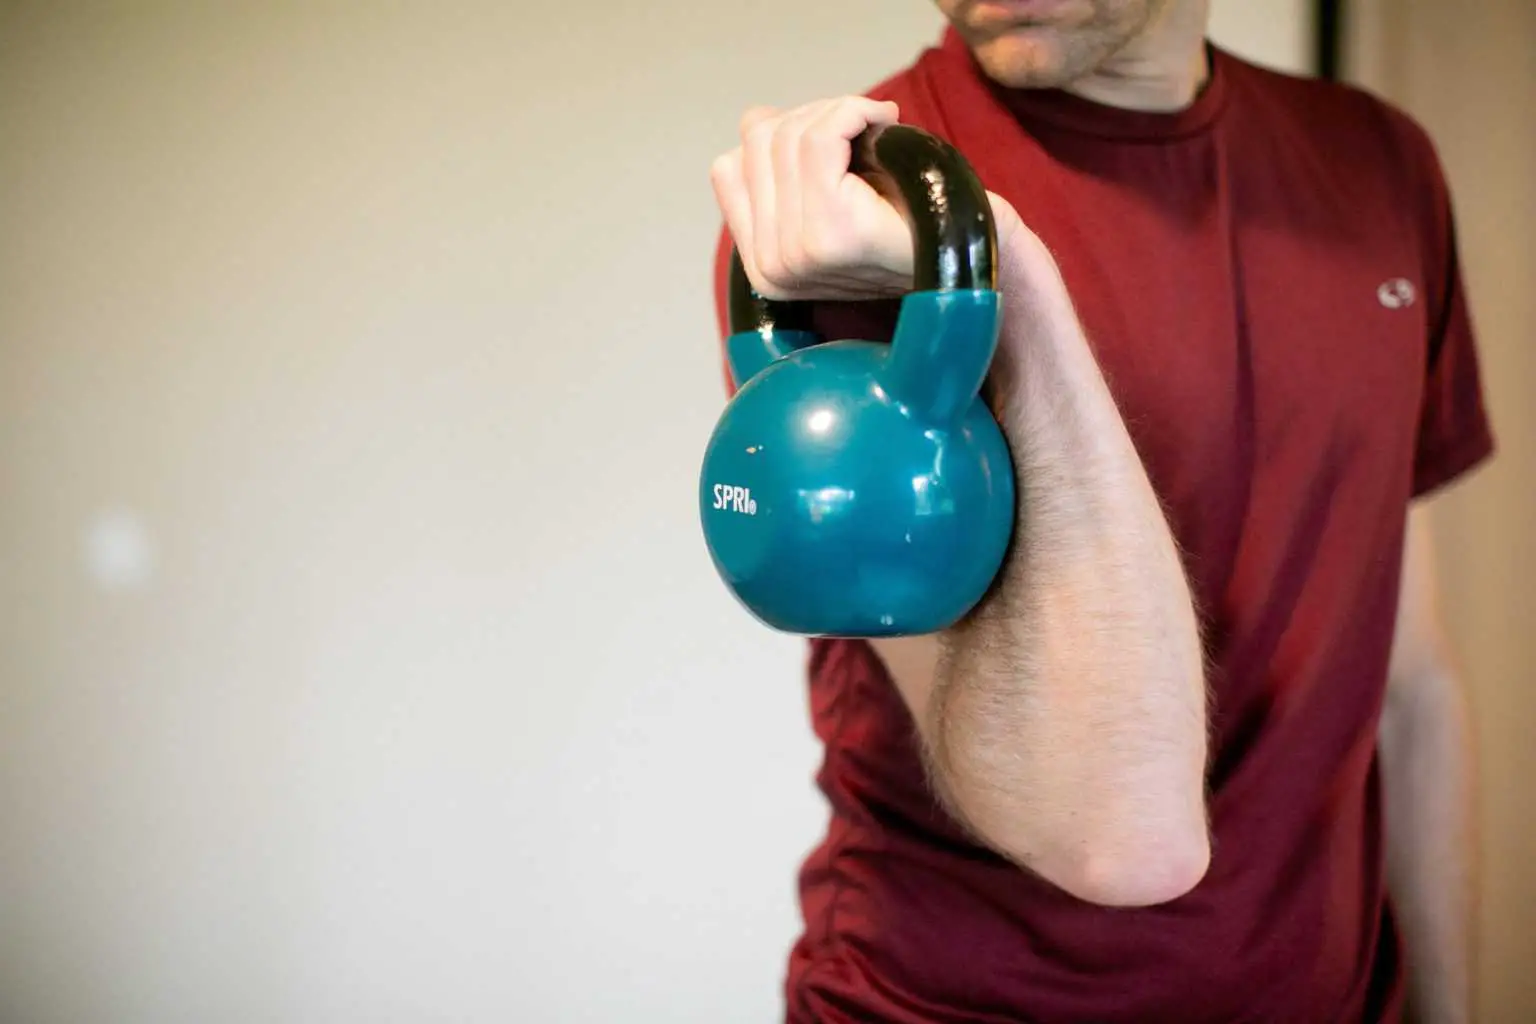 Man holding a kettlebell with one hand